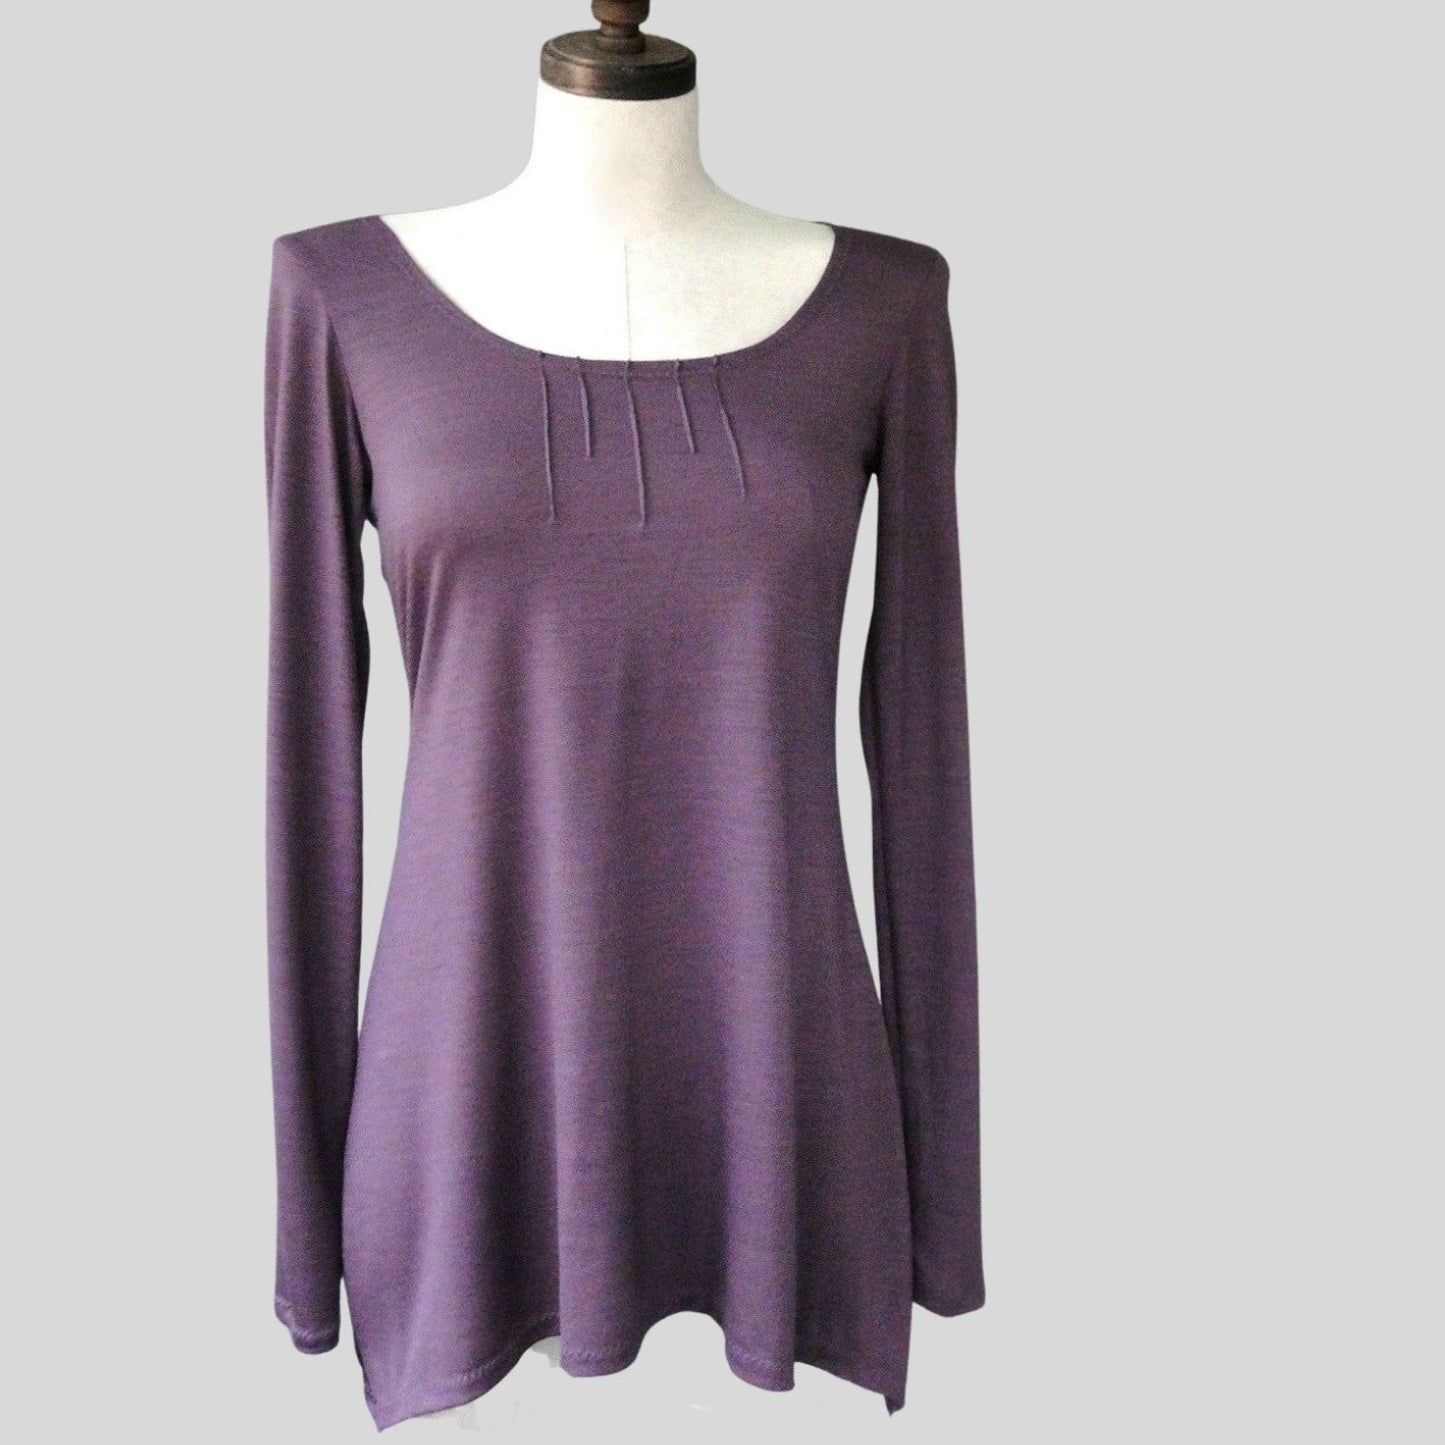 Flare wool top | 100% merino wool jersey top | Shop merino wool clothing made in Canada | Women's organic clothes store | Econica